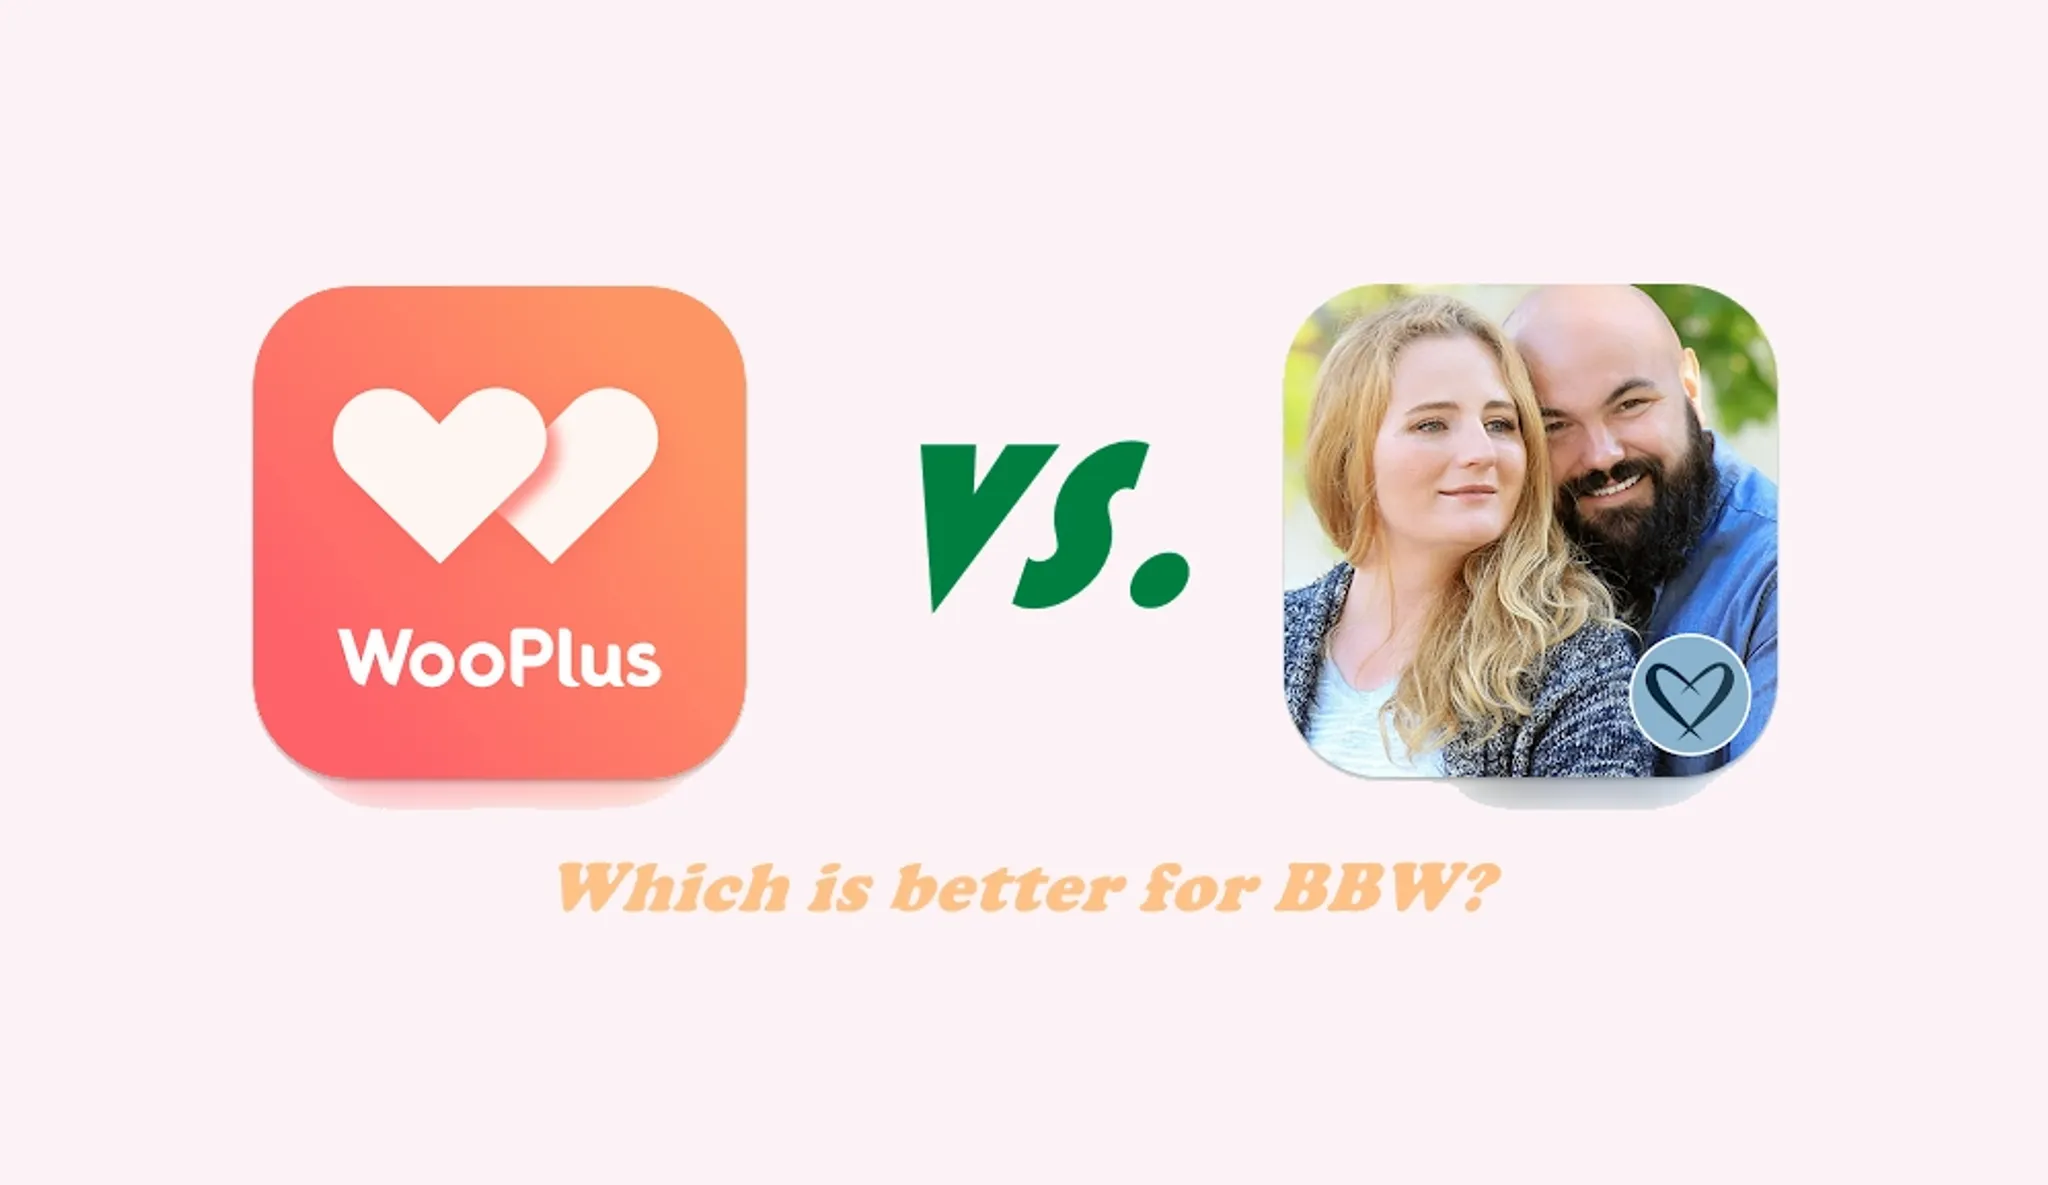 WooPlus vs BBWCupid: Which is Better for BBW